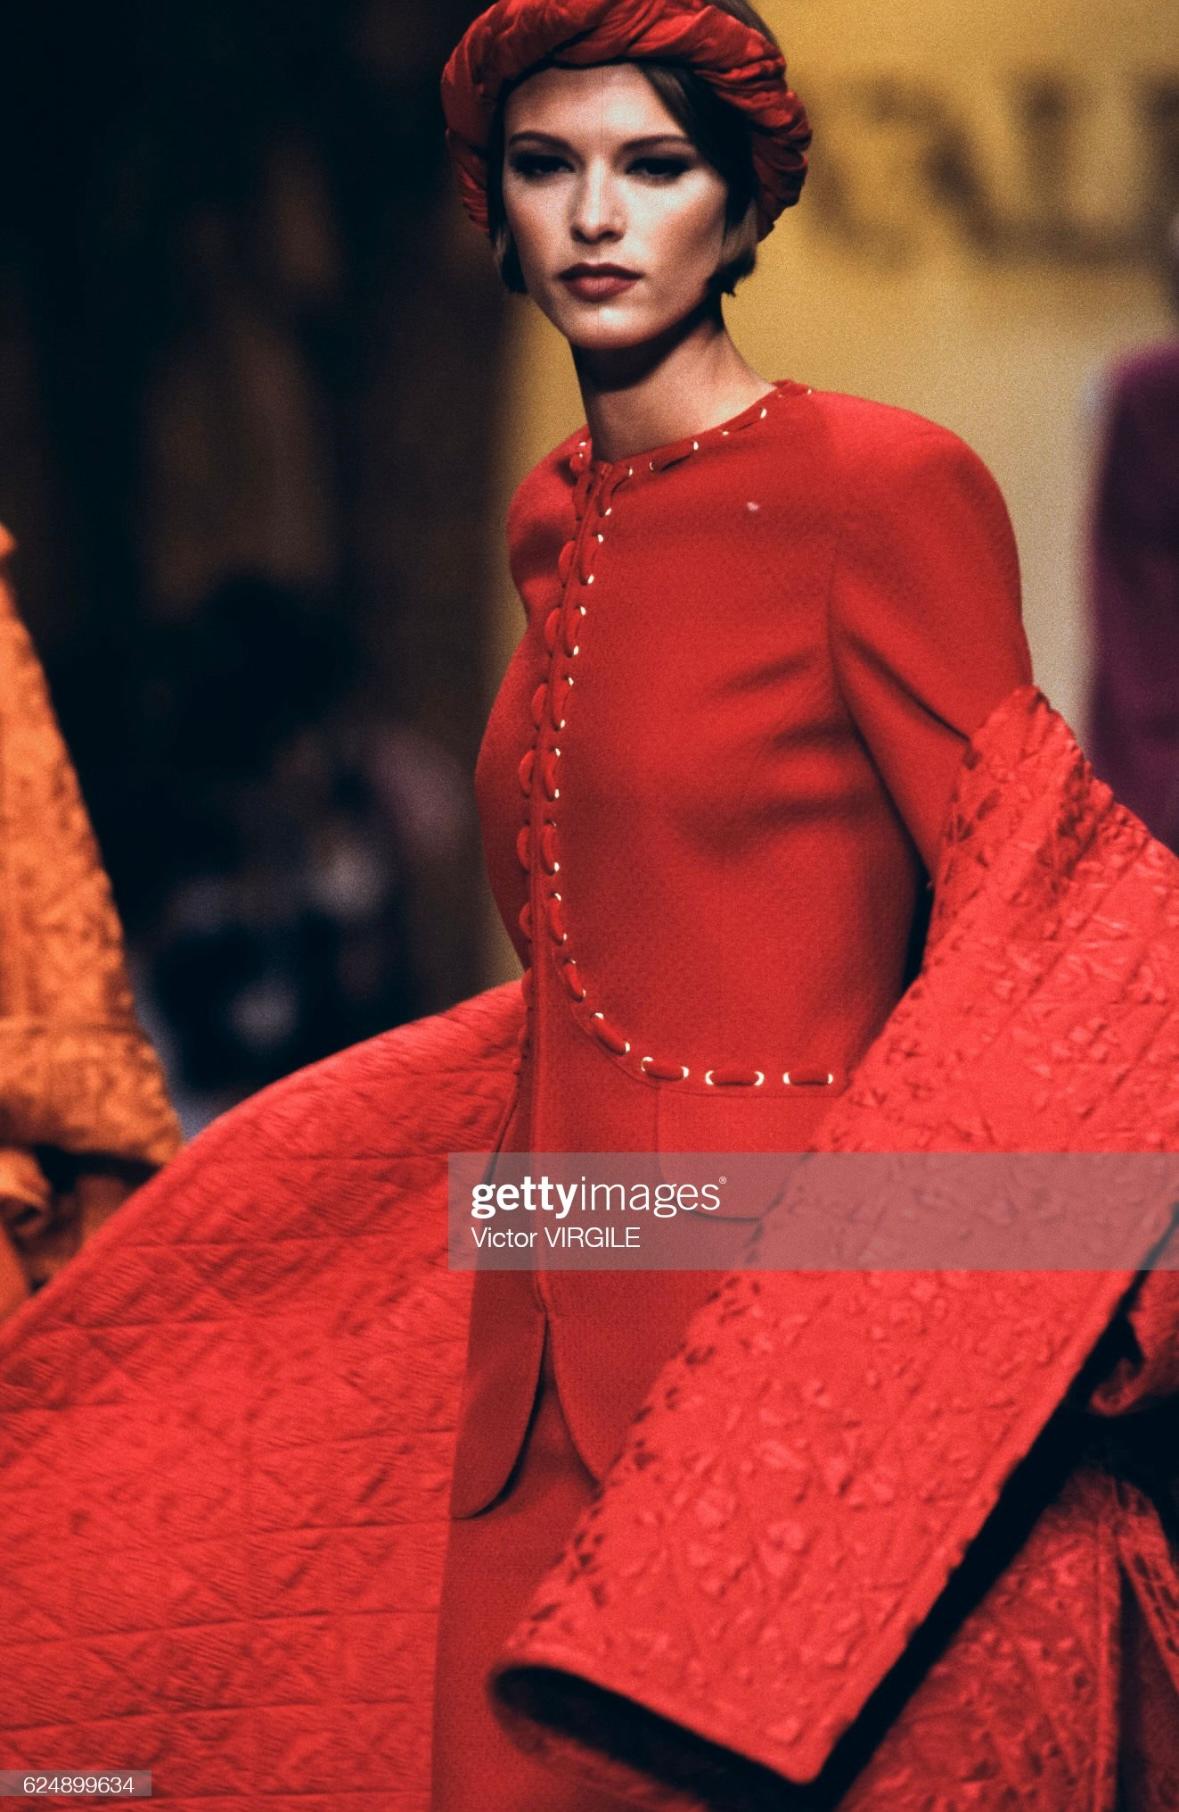 Presenting a bright red Valentino tweed jacket. From the Fall/Winter 1992 collection, this jacket debuted on the season's runway. The blazer features a crew neckline, zipper closure, laced velvet ribbon, and is made complete with gold-tone zodiac